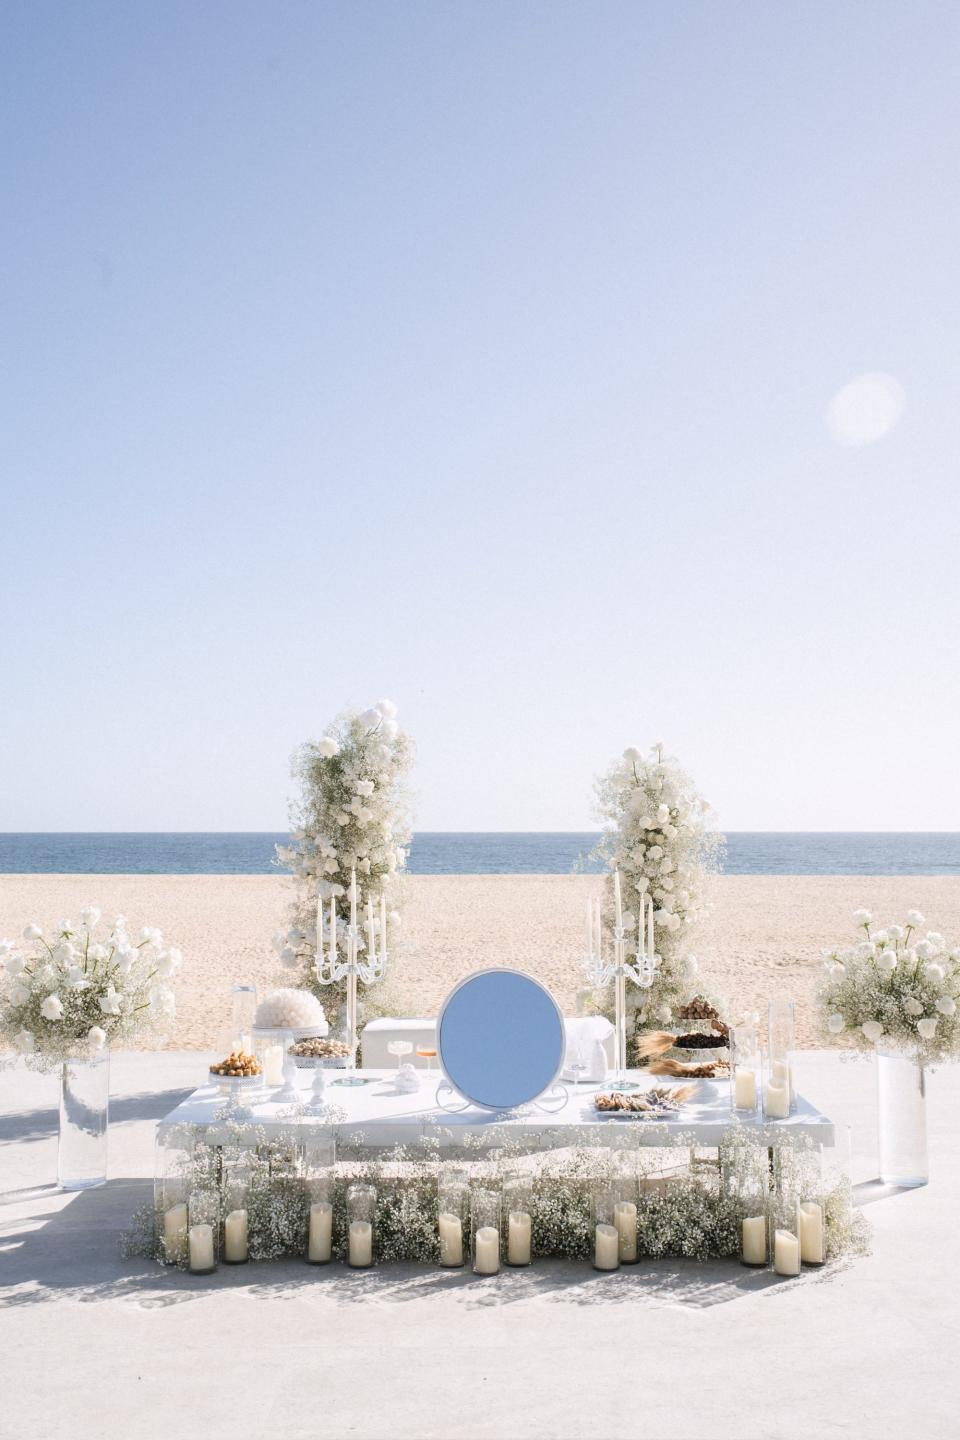 A floral arch and table sit in front of a beach and ocean.